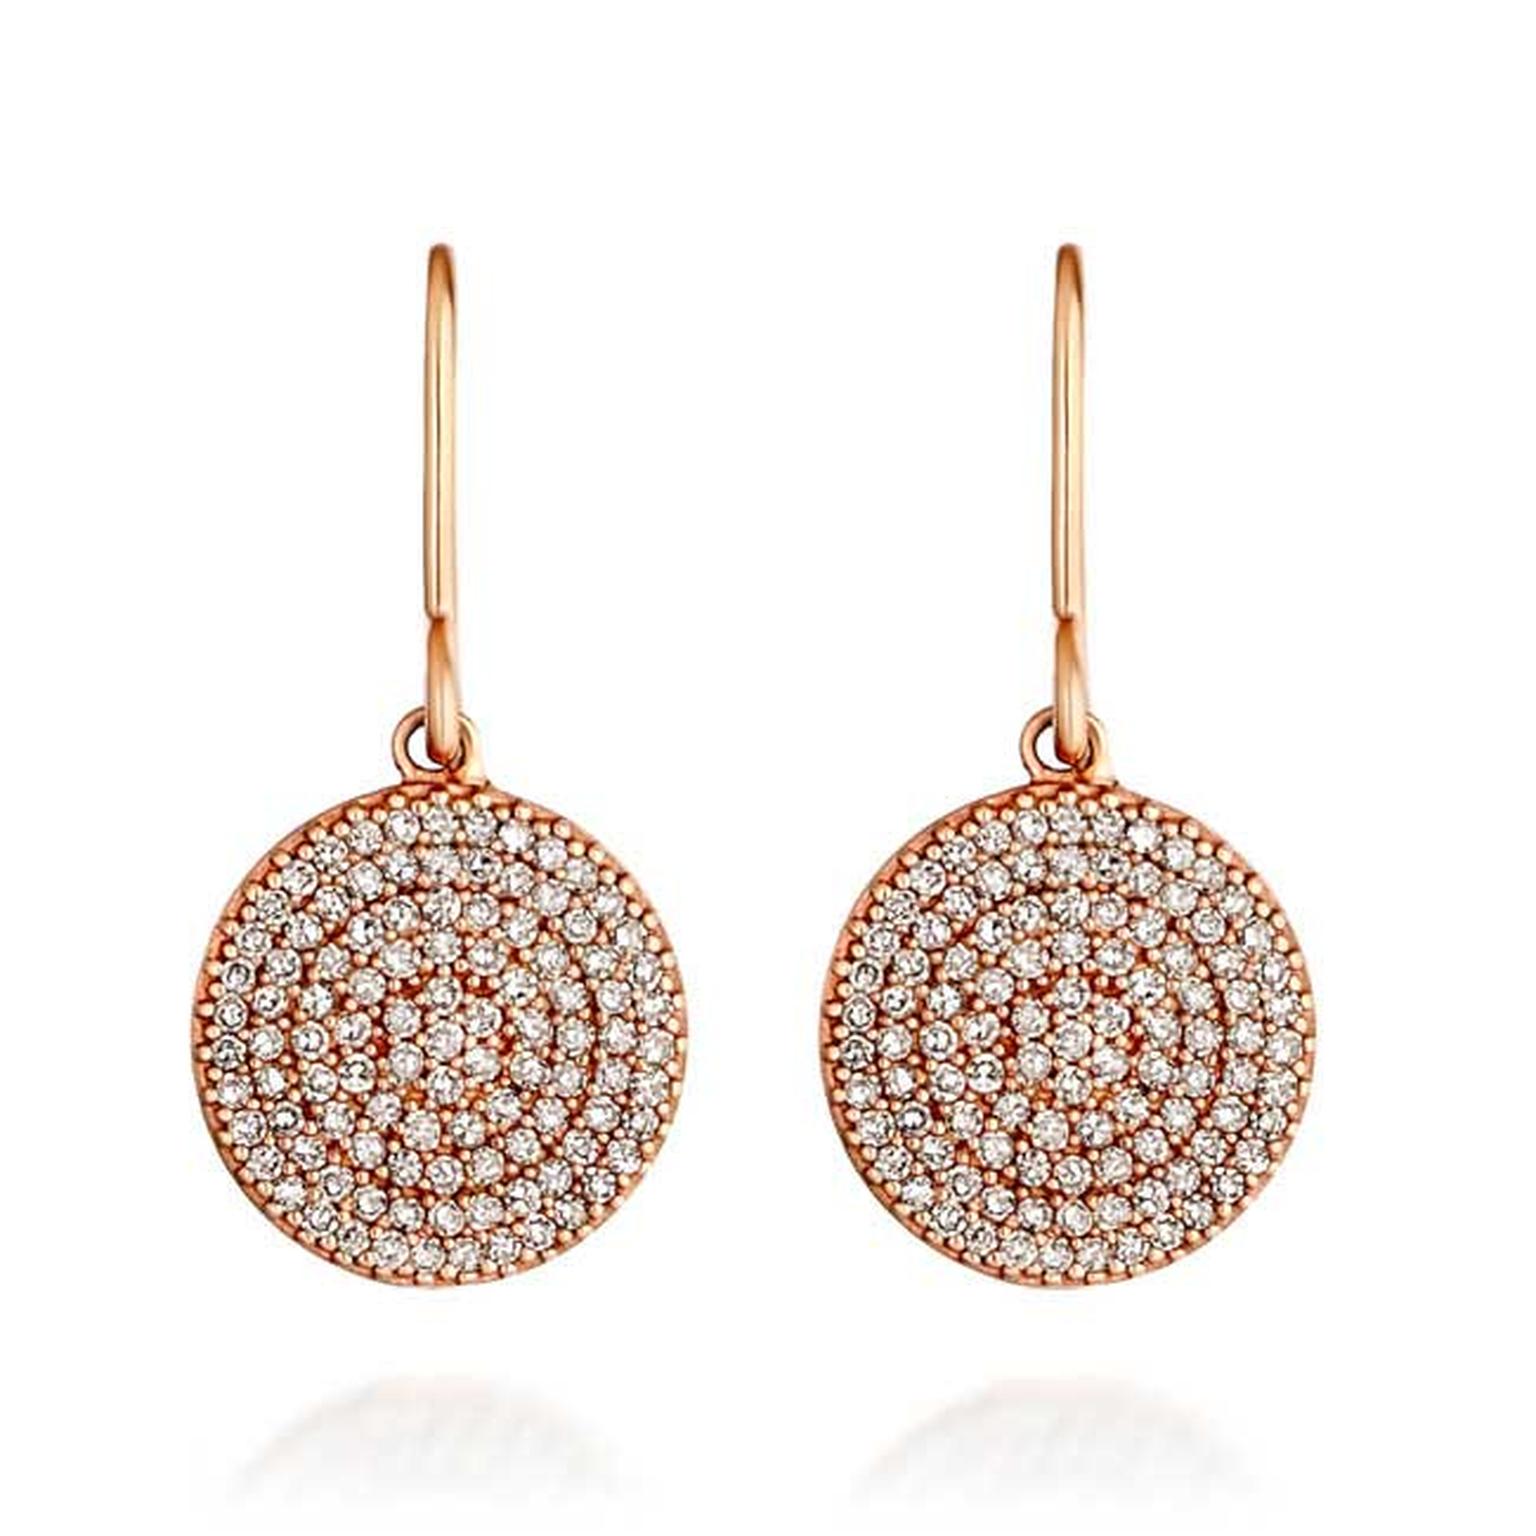 Astley Clarke Muse Icon diamond and rose gold earrings (£1,350).